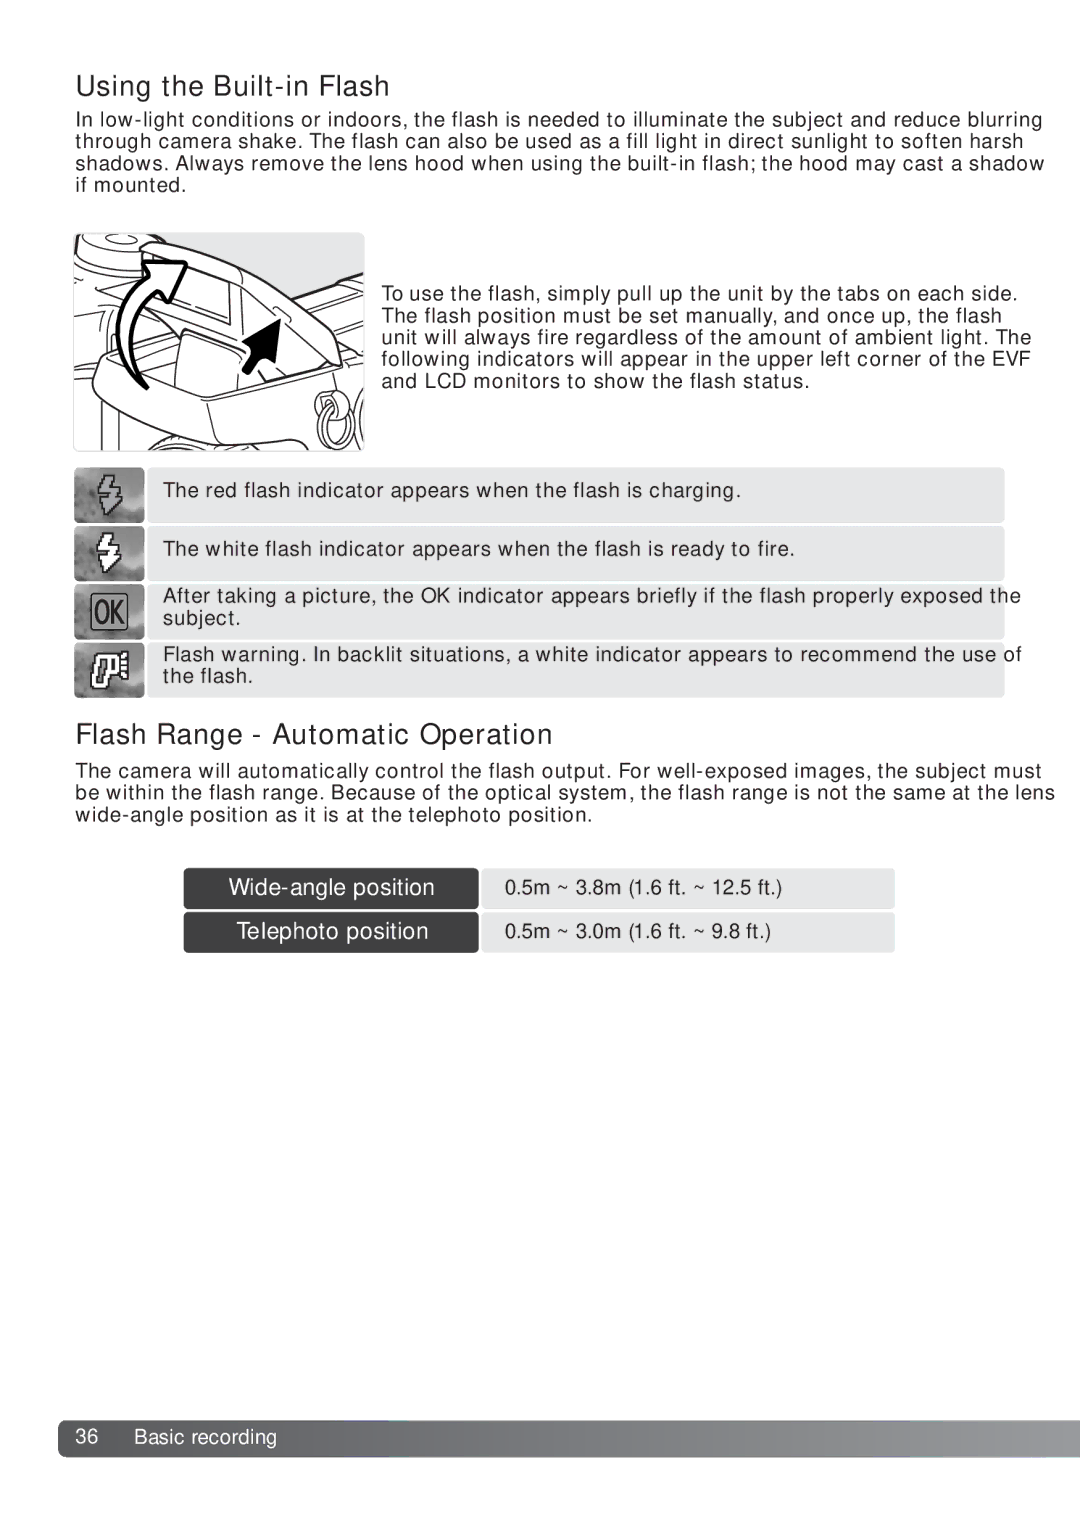 Konica Minolta DiMAGE_A2 instruction manual Using the Built-in Flash, Flash Range Automatic Operation 